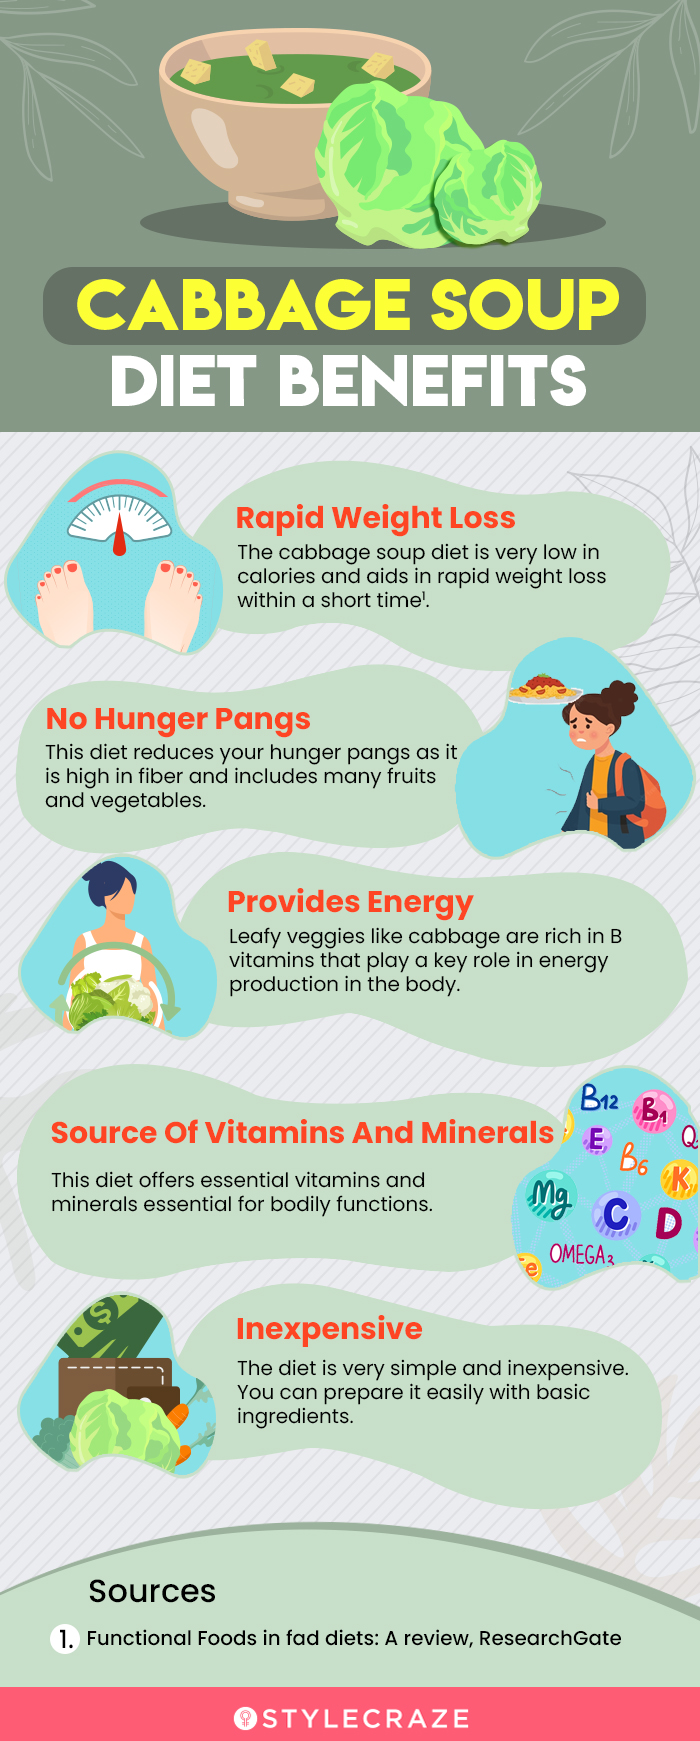 cabbage soup diet benefits [infographic]